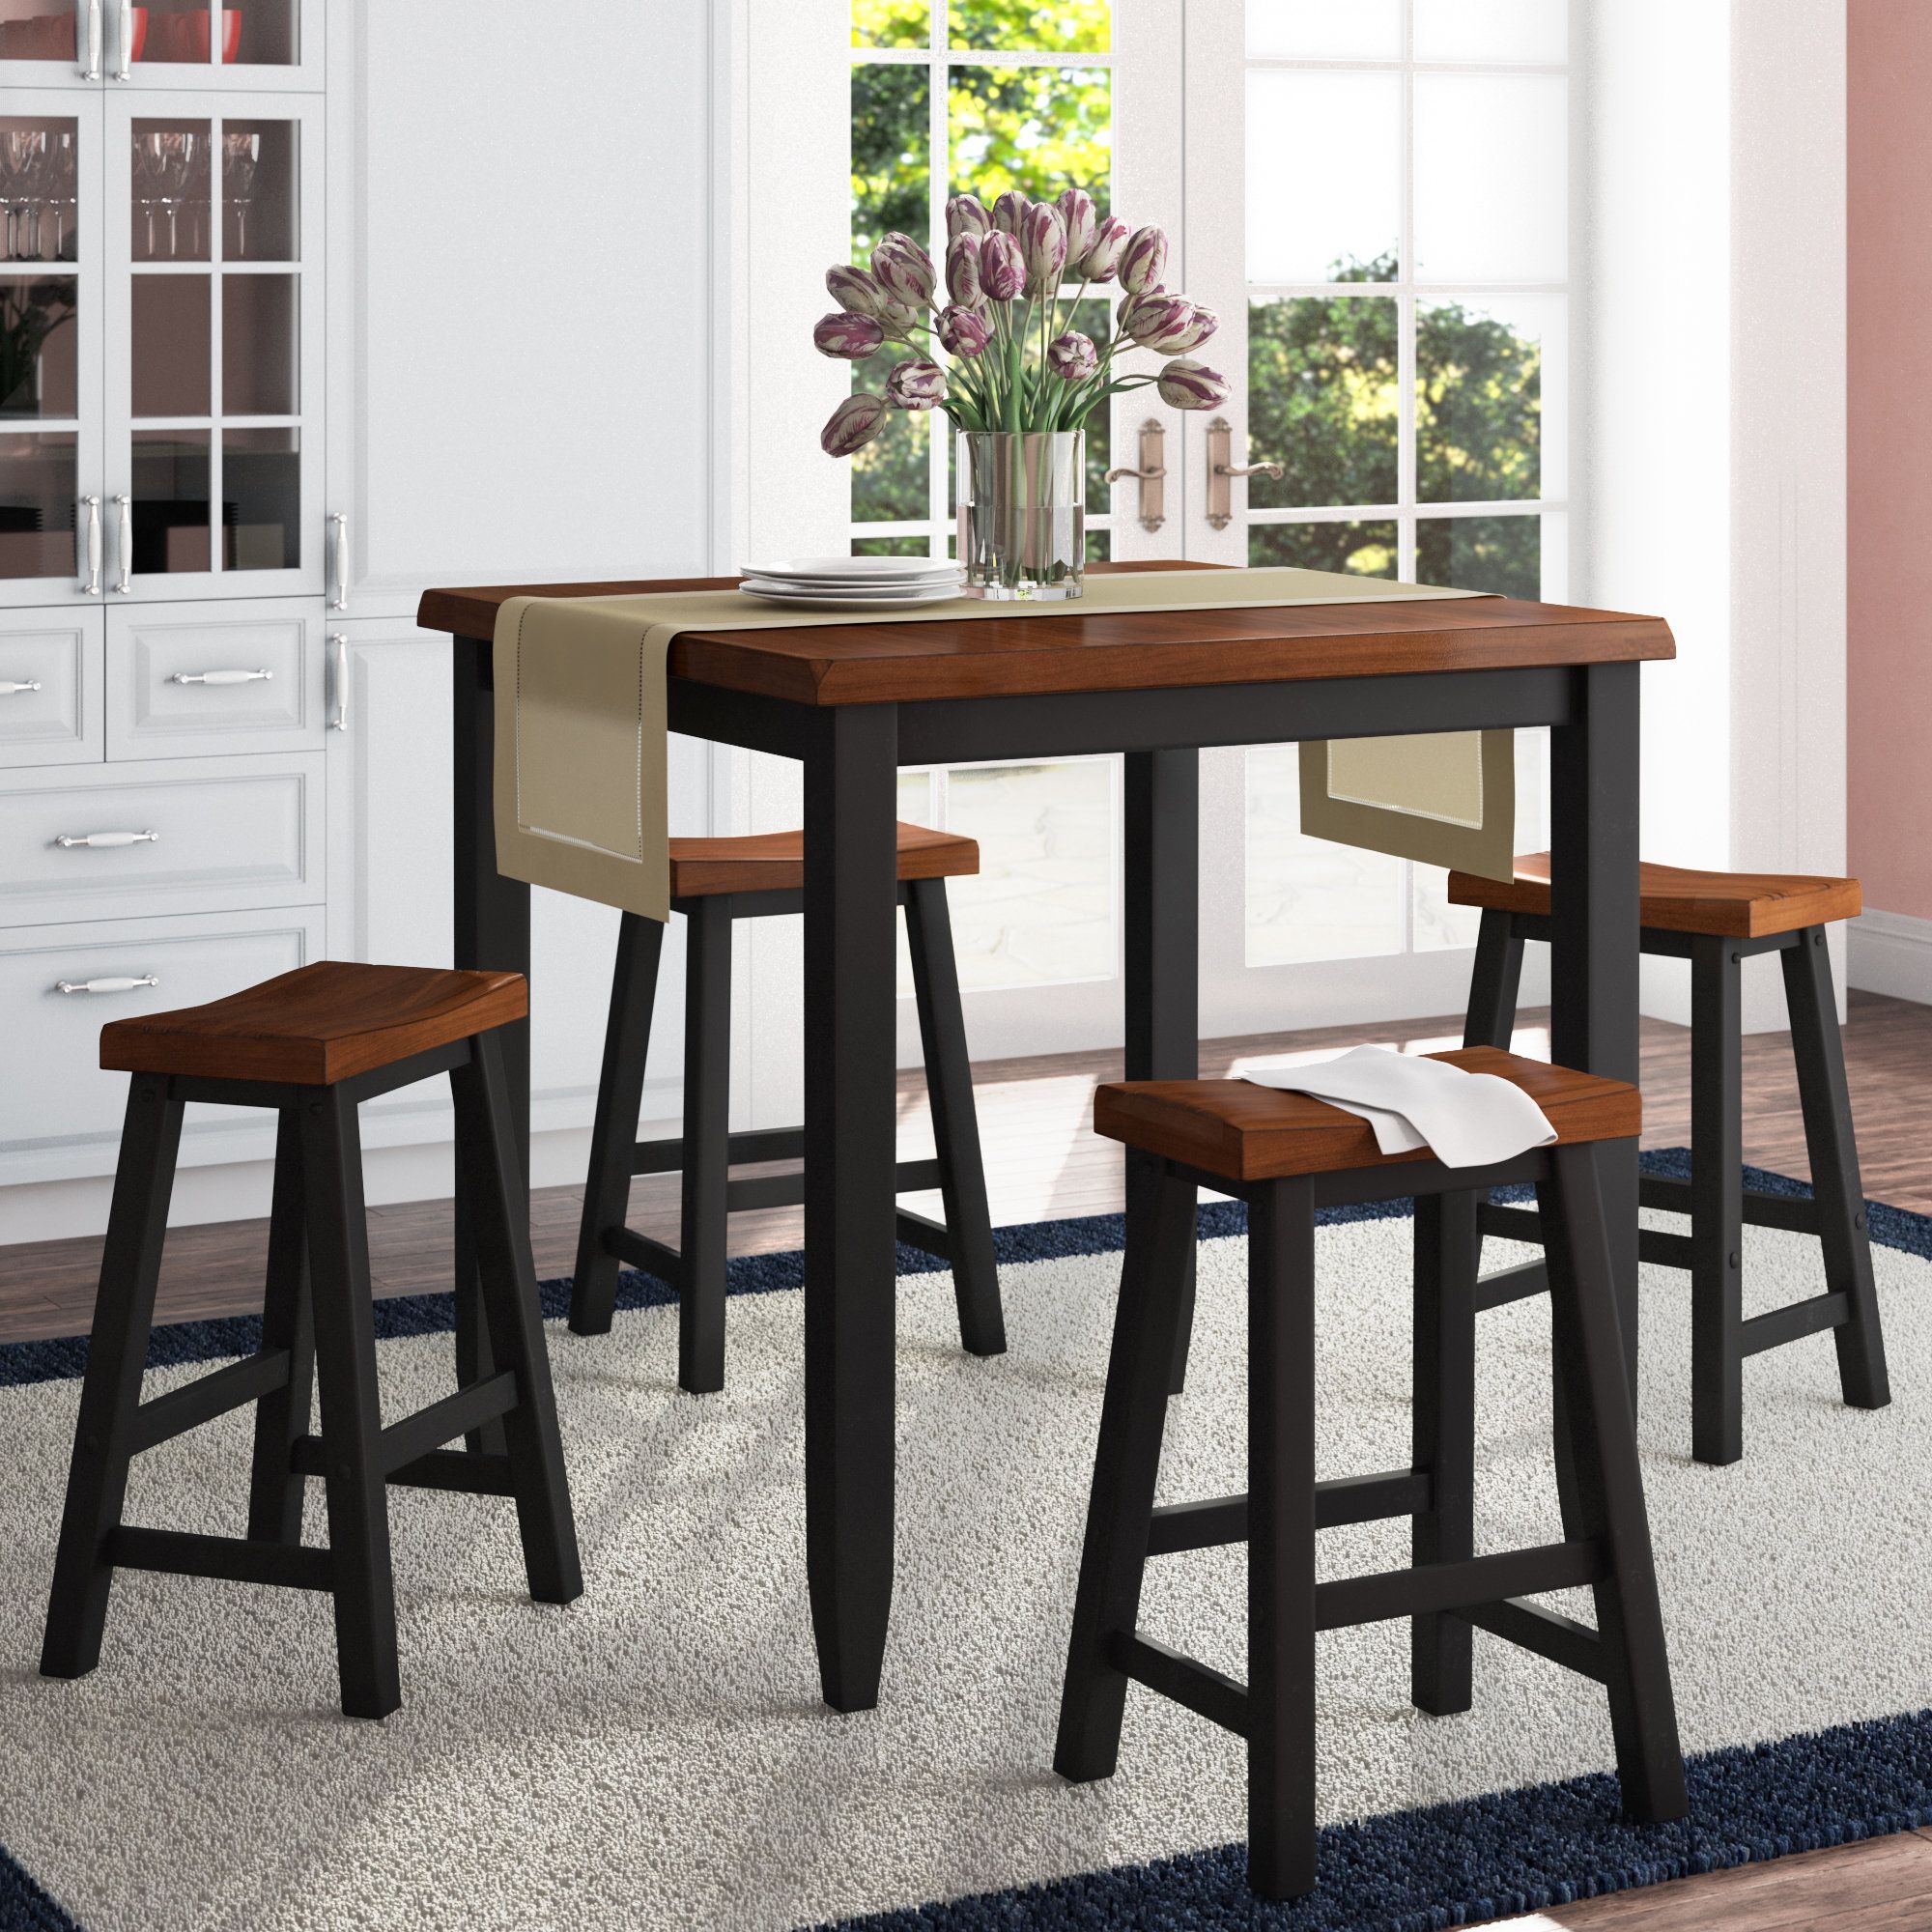 Simmons Casegoods Ruggerio 5 Piece Counter Height Pub Table Set Intended For 2018 Winsted 4 Piece Counter Height Dining Sets (View 10 of 20)